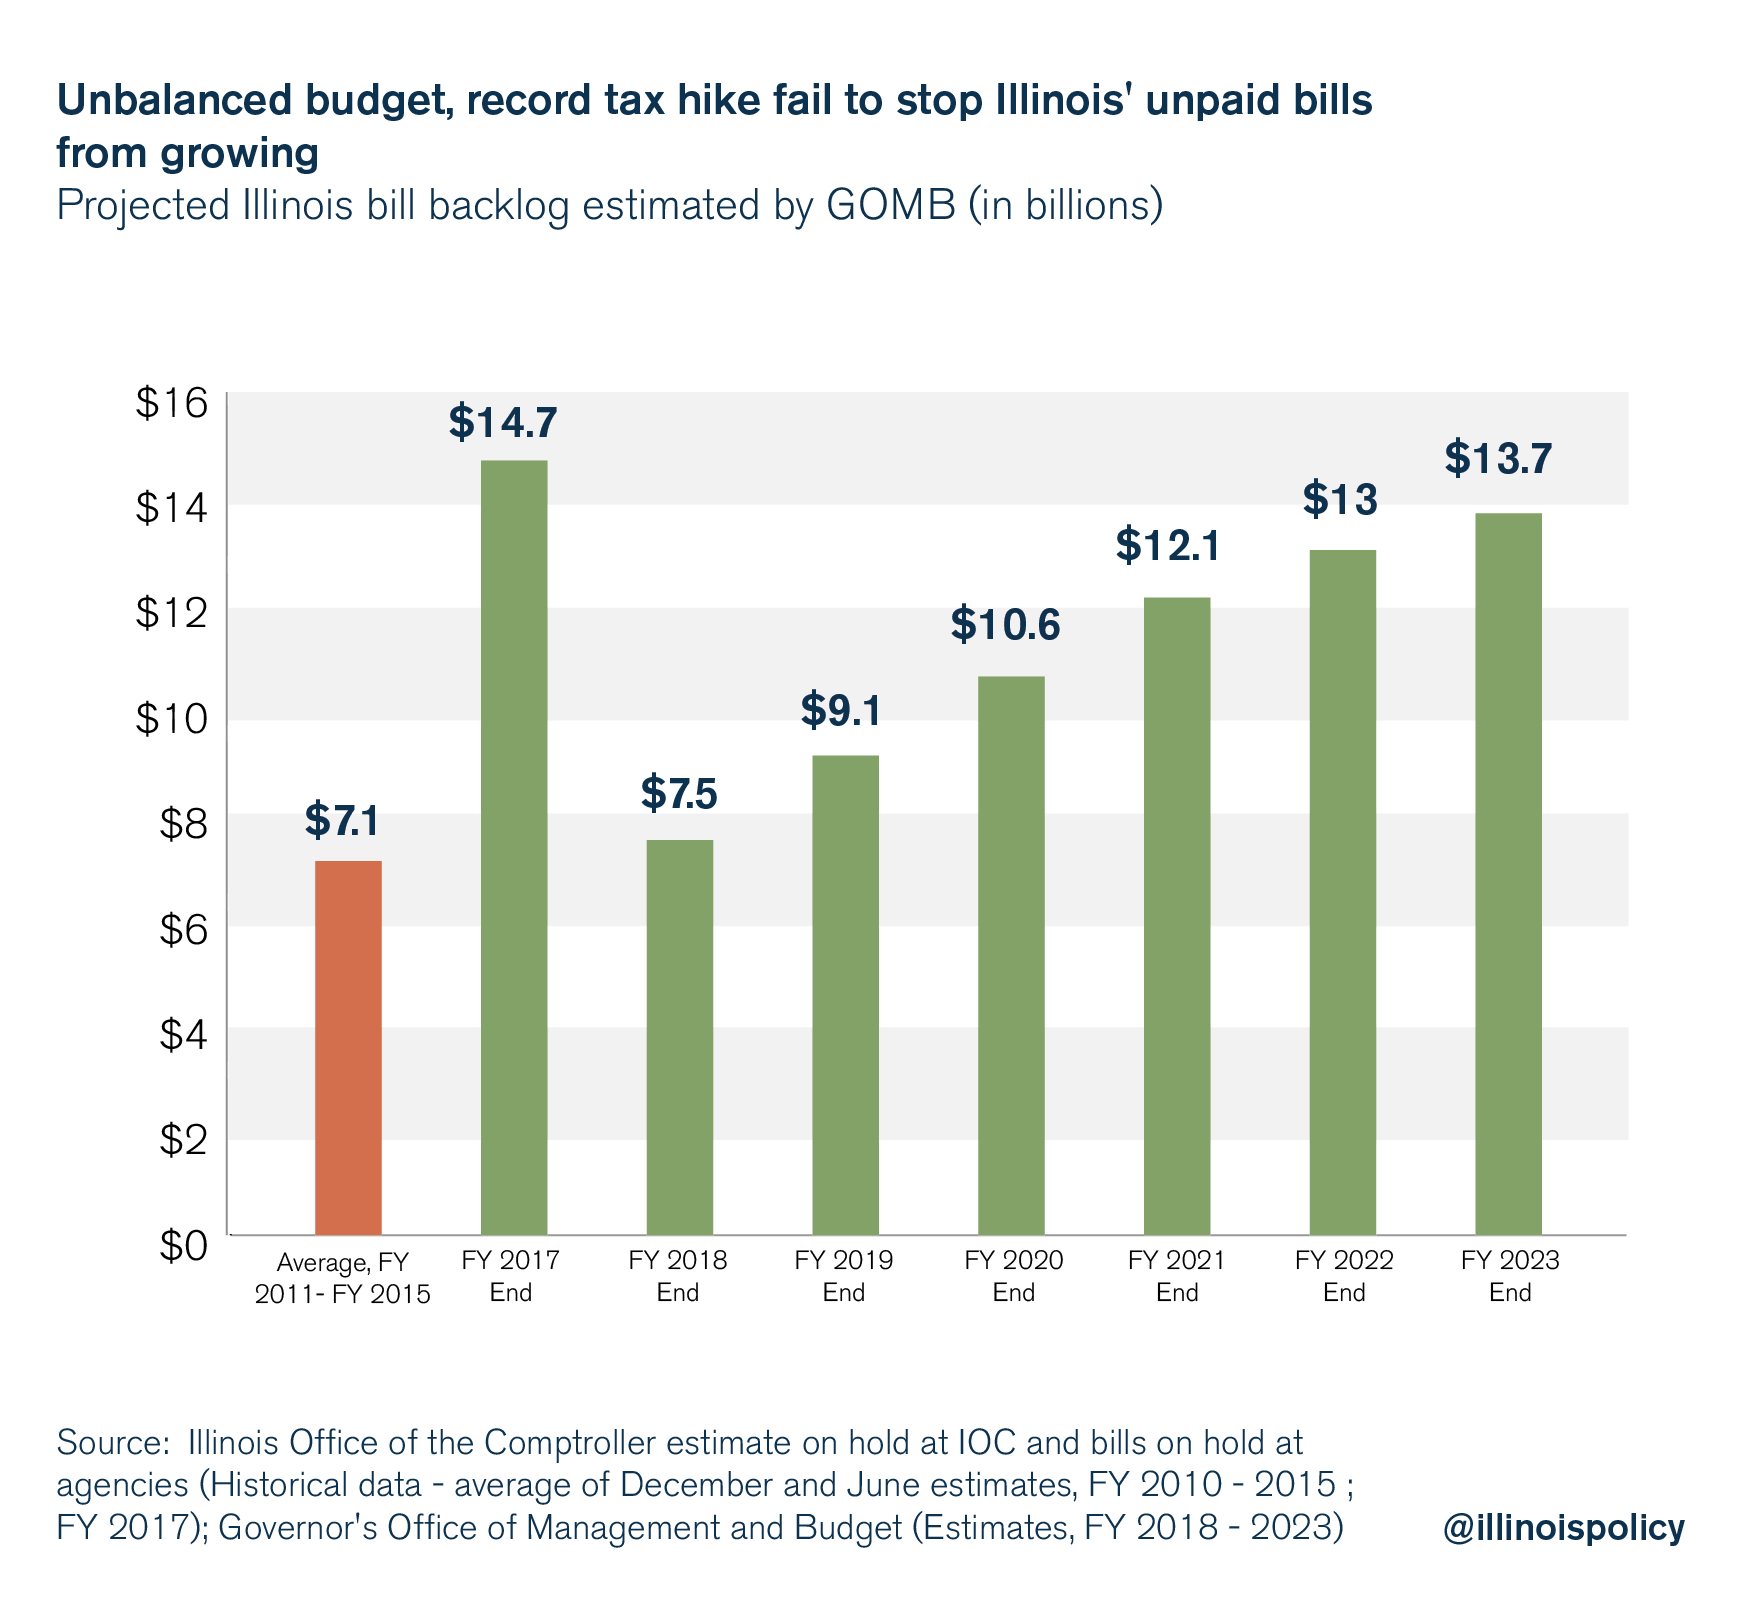 Unbalanced budgets, record tax hike fail to stop Illinois’ unpaid bills from growing